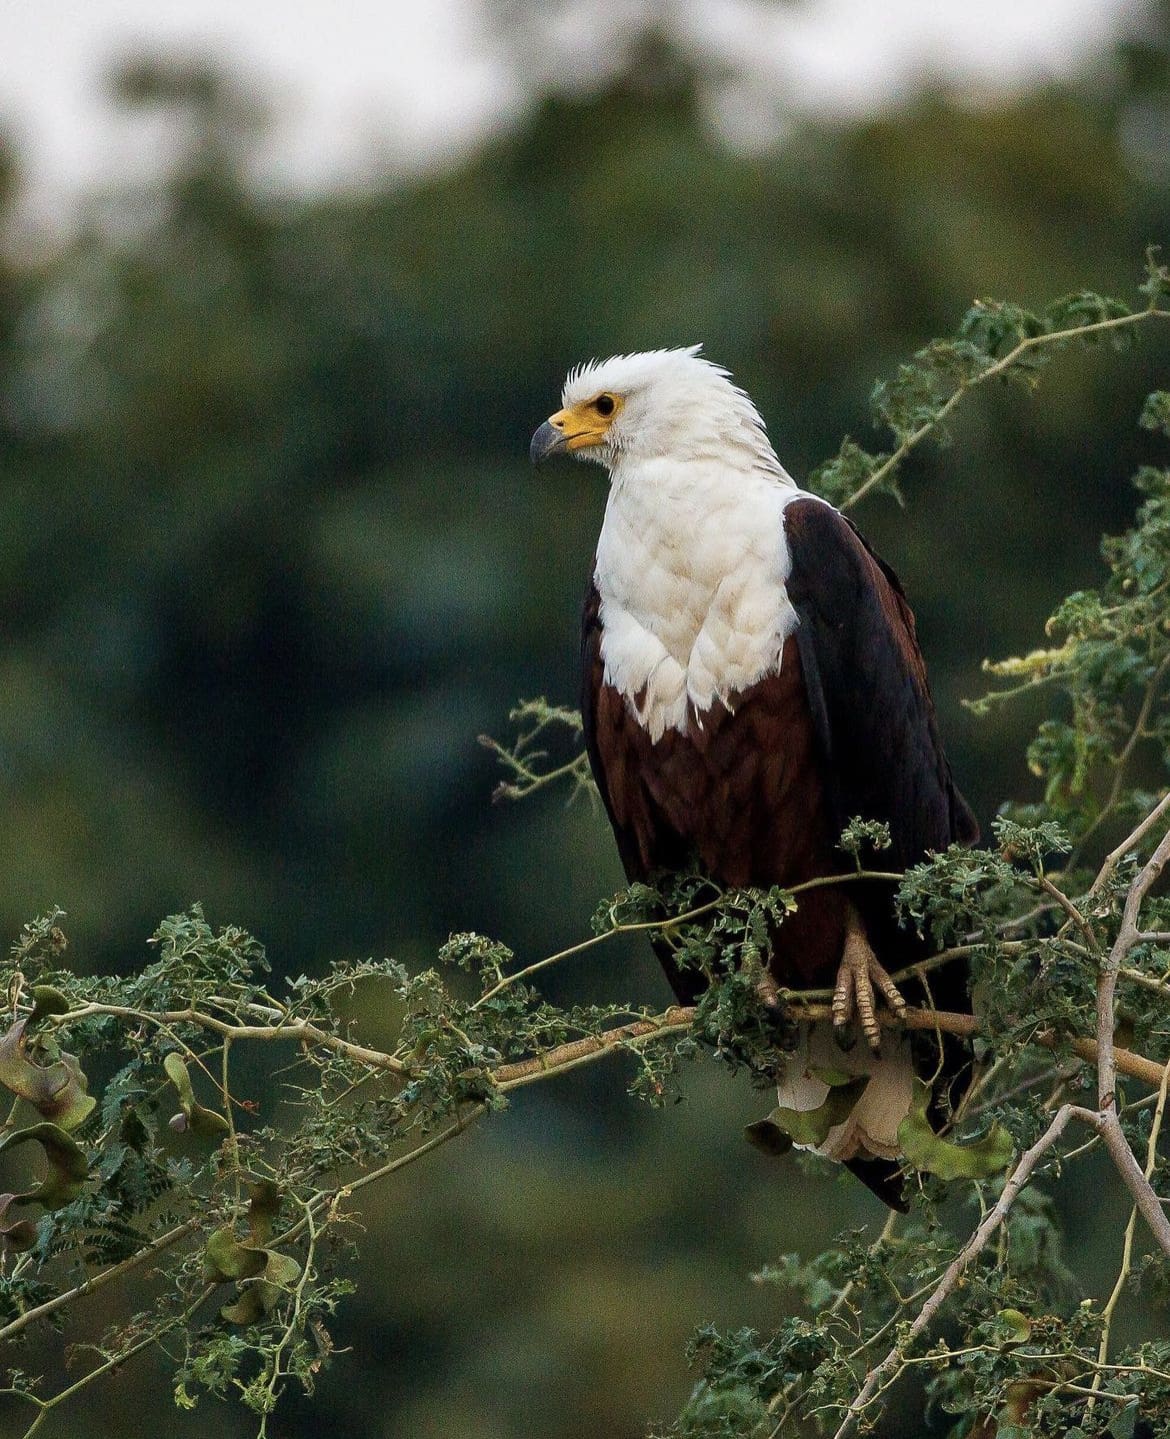 Fish Eagle resting in a tree, with a keen eye on the water below